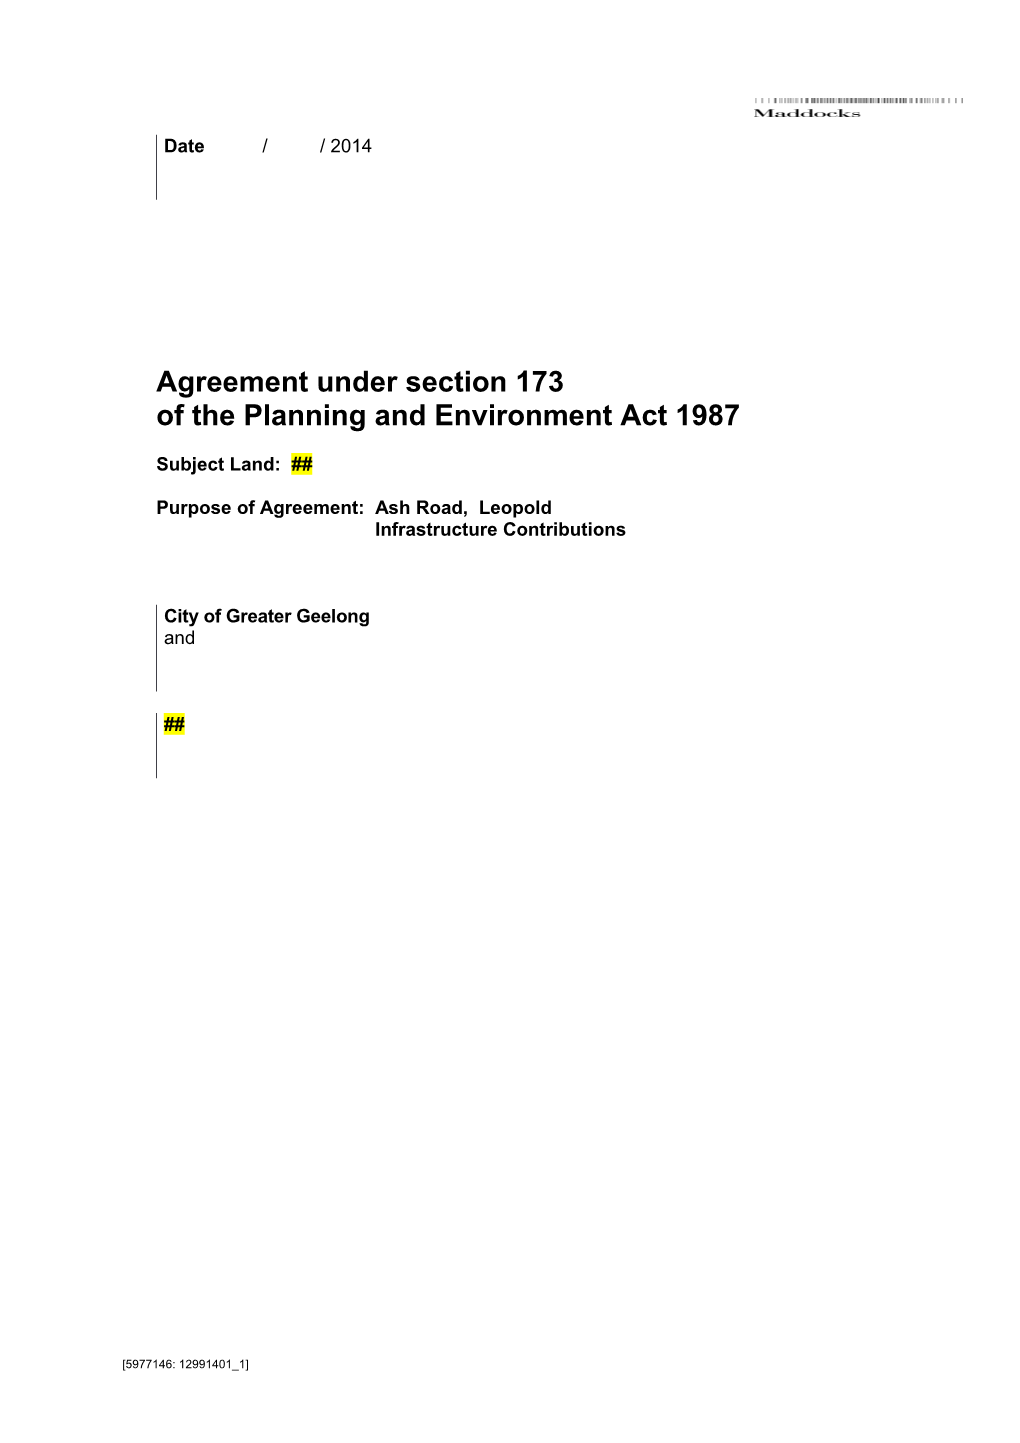 Of the Planning and Environment Act 1987